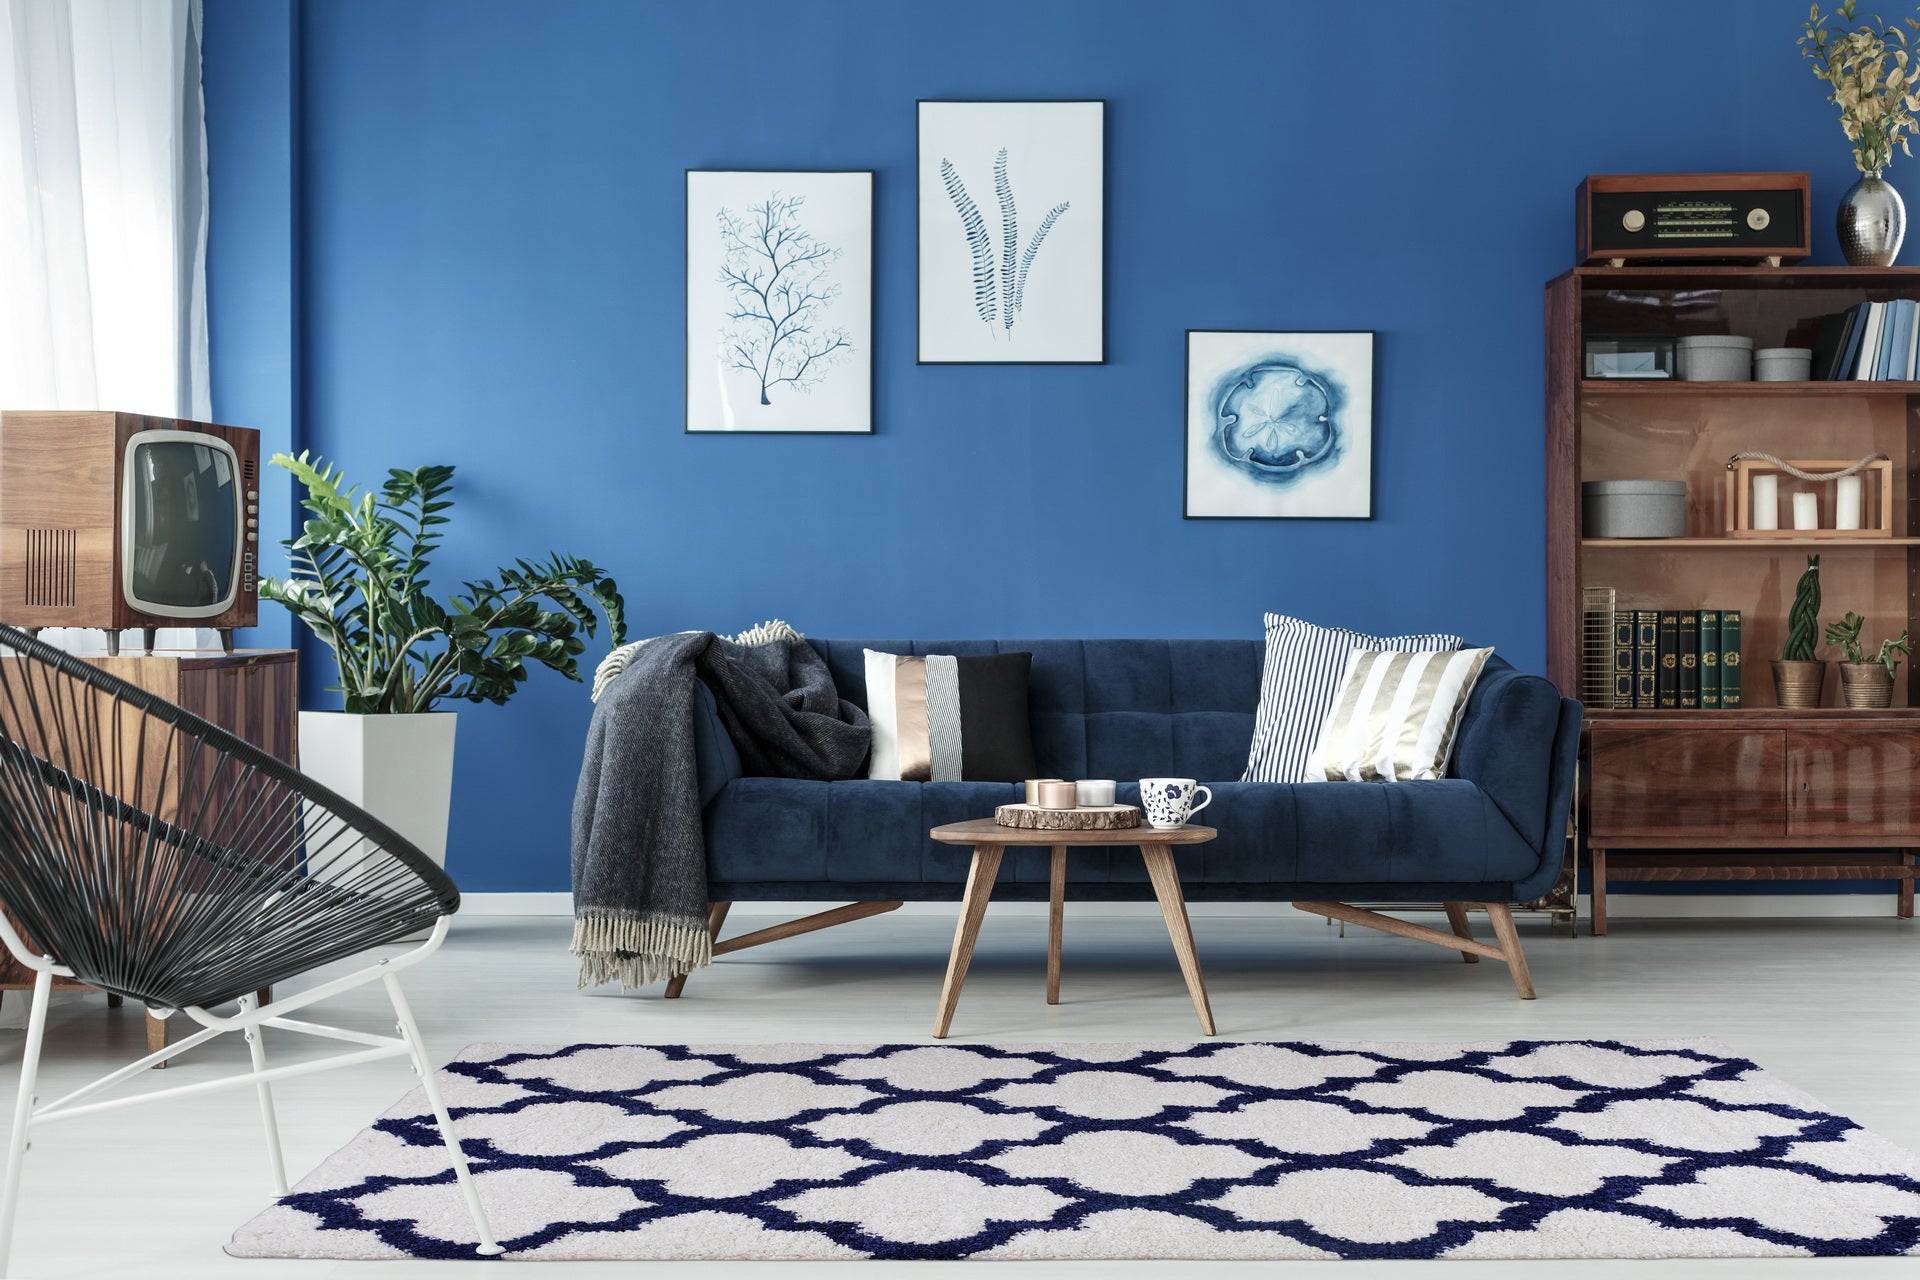 ladole rugs grant shaggy fes made in europe beautiful abstract polypropylene small mat doormat rug in dark blue white 110 x 211 57cm x 90cm 2x5, 3x5 Runner Rug, Entry Way, Entrance, Balcony, Bedside, Home Office, Table Top